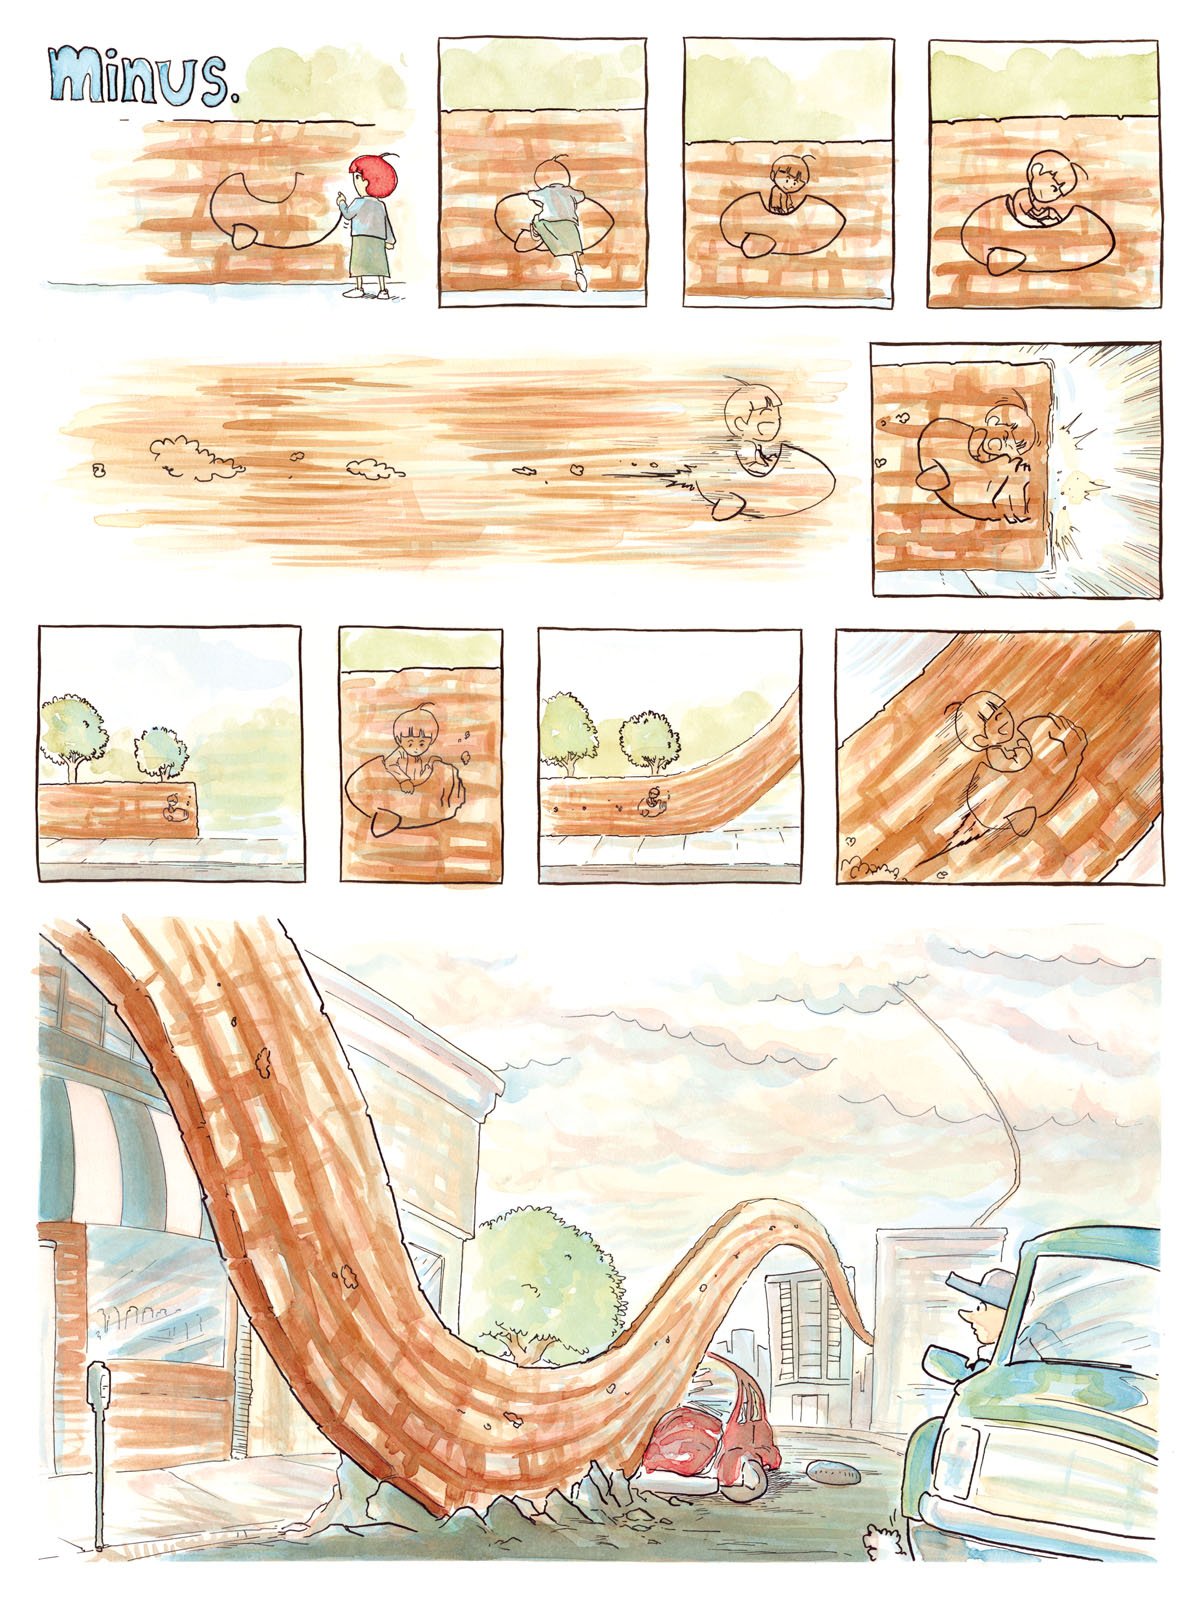 Comic strip. Transcription. Title: "minus." minus draws a rocketship on a brick wall. She climbs into the drawing, turning into an outline. She starts the rocket, which zooms through the wall, and laughs as she flies in high speed. minus crashes at the end of the brick wall, crumpling the front of the rocket. She looks forward at empty space. The next panel, we see the brick wall extending, and slanting upward. The rocket starts again as minus smiles and flies through the brick wall. In the last panel, a curving brick wall crashes through a sidewalk, narrowly misses a car, flies over buildings, and continues into the sky, as a driver looks out from his car.